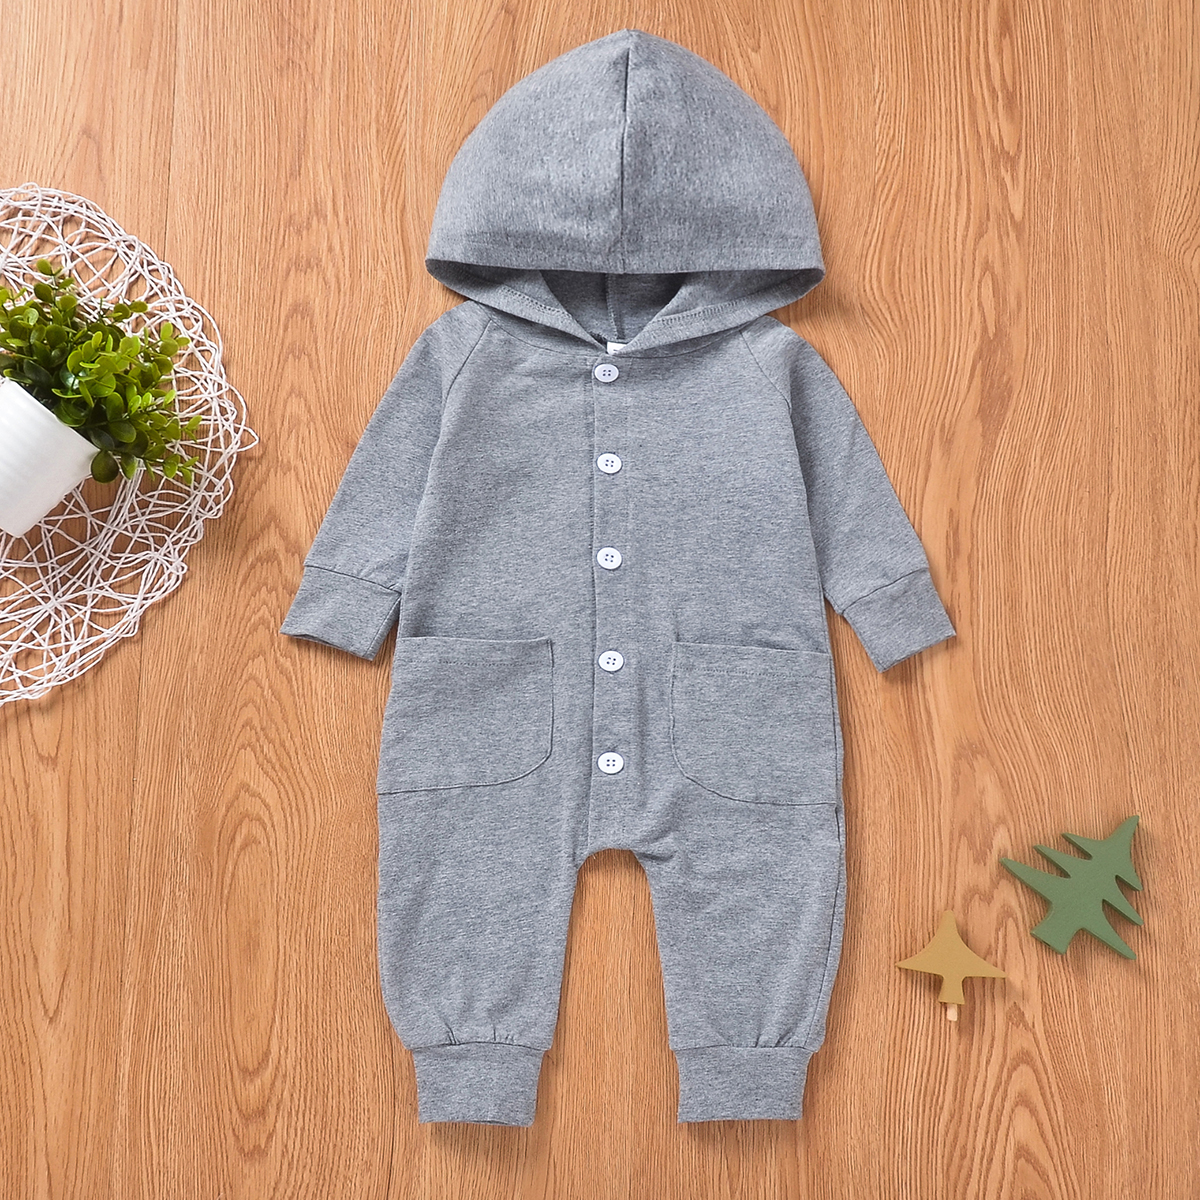 Baby Unisex straight Jumpsuits Hooded Cotton Fashion Long Sleeve Infant Clothing Outfits